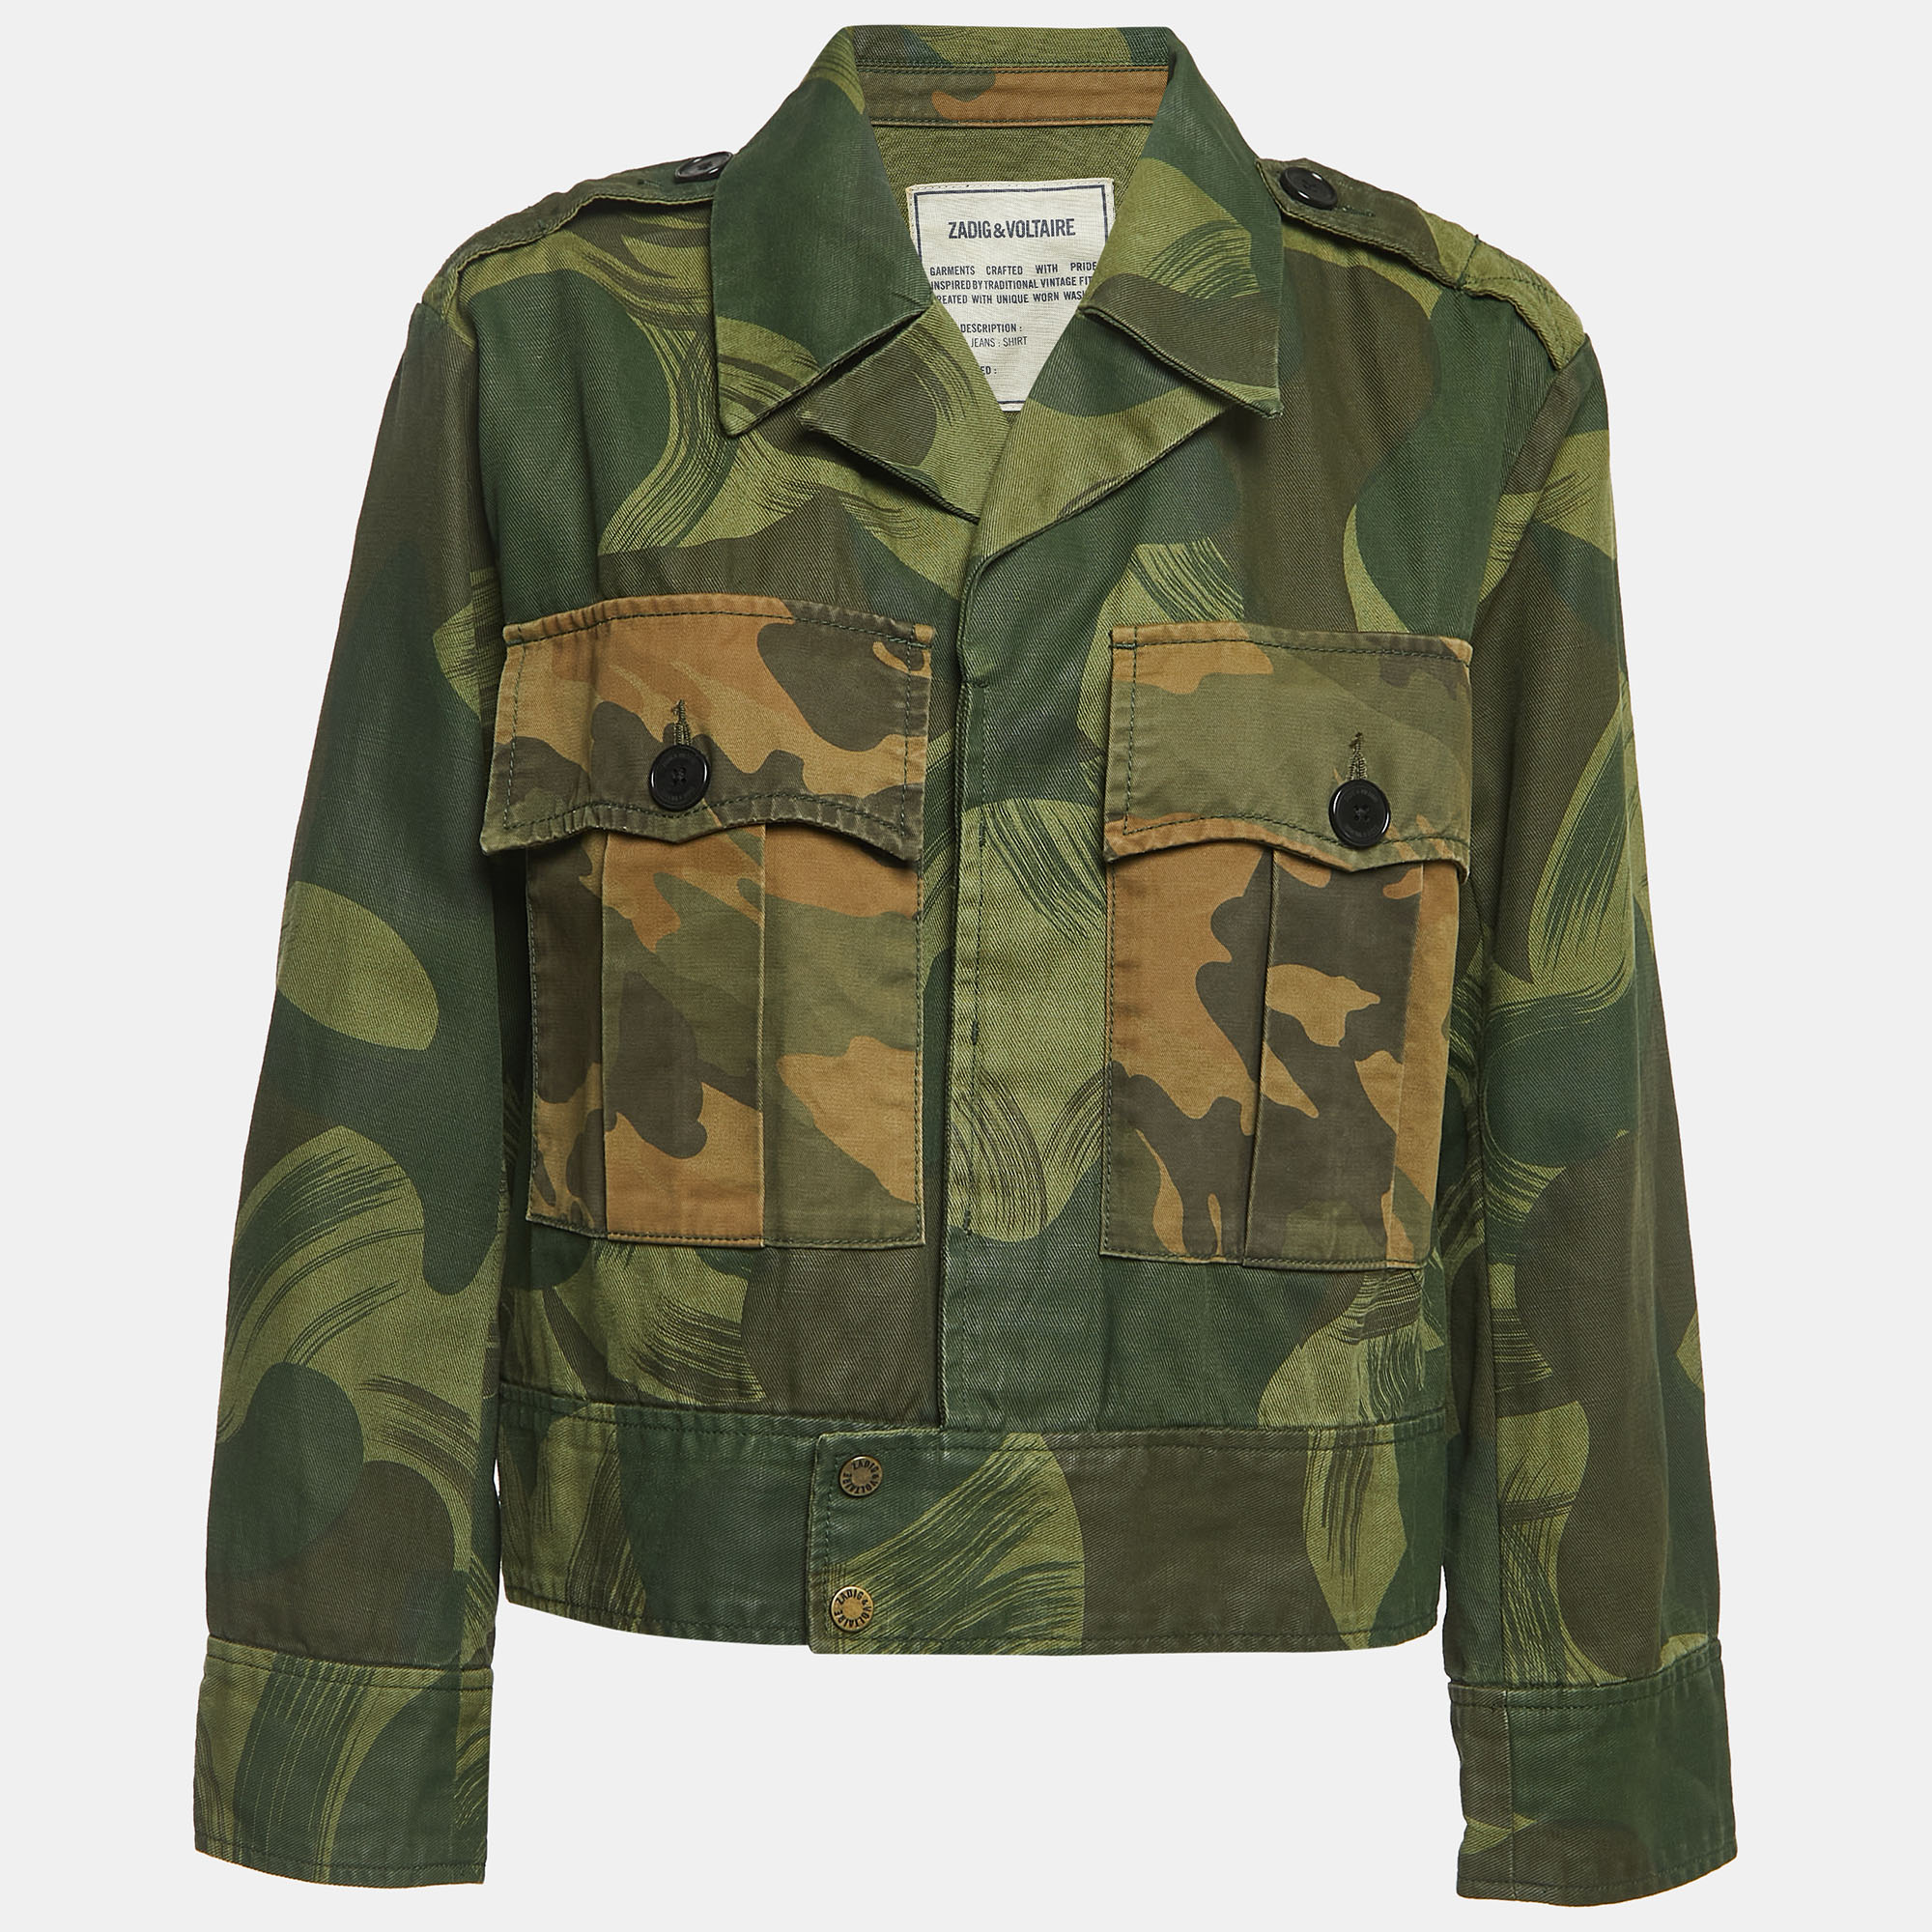 Zadig & voltaire military green camouflage cotton blend button front jacket xs